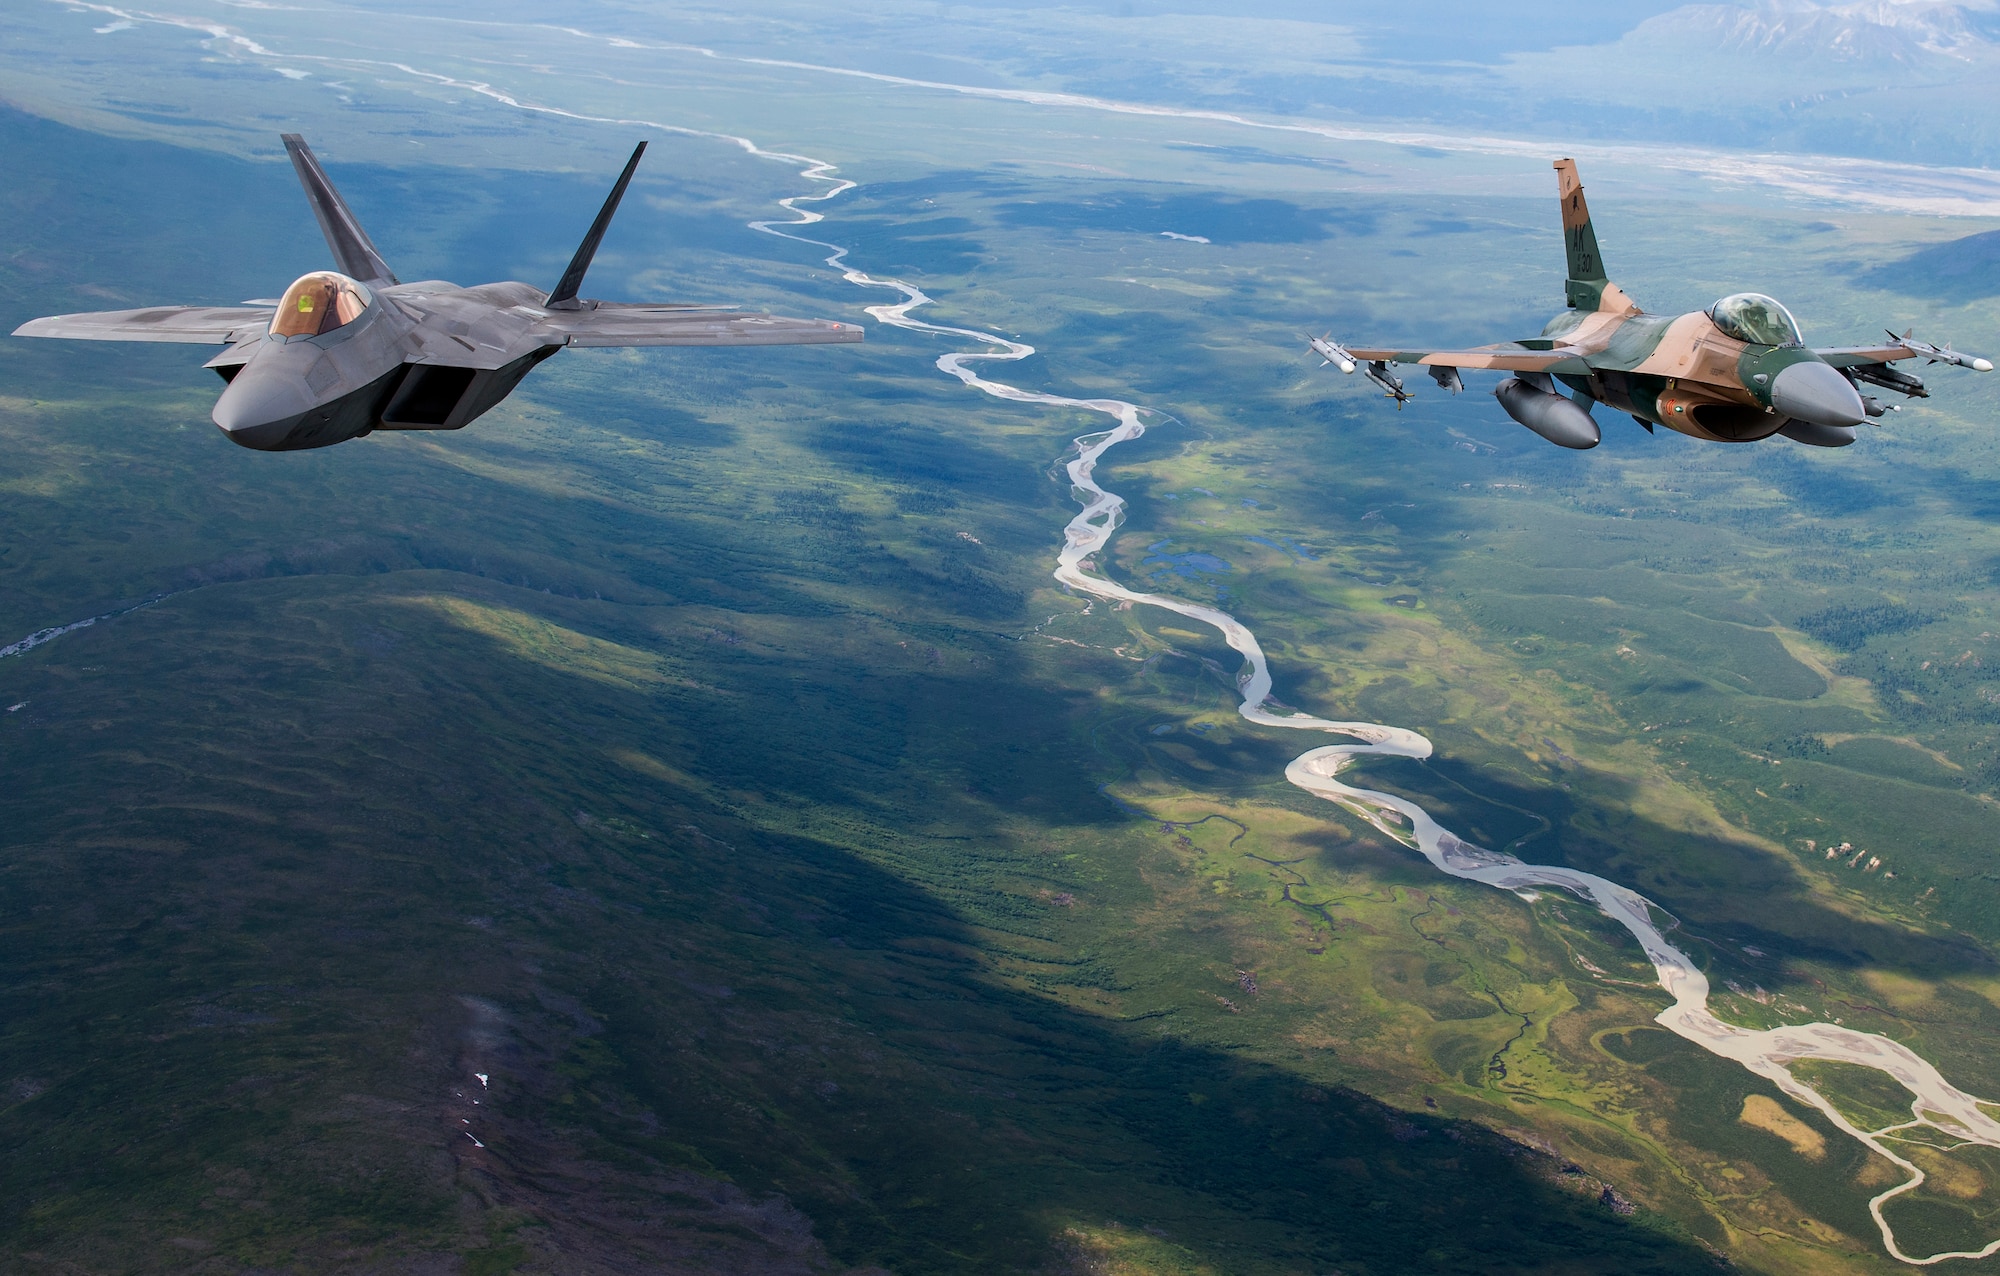 A U.S. Air Force F-22 Raptor from Joint Base Elmendorf-Richardson and an F-16 Fighting Falcon from Eielson Air Force Base fly in formation over the Joint Pacific Alaska Range Complex, July 18, 2019.